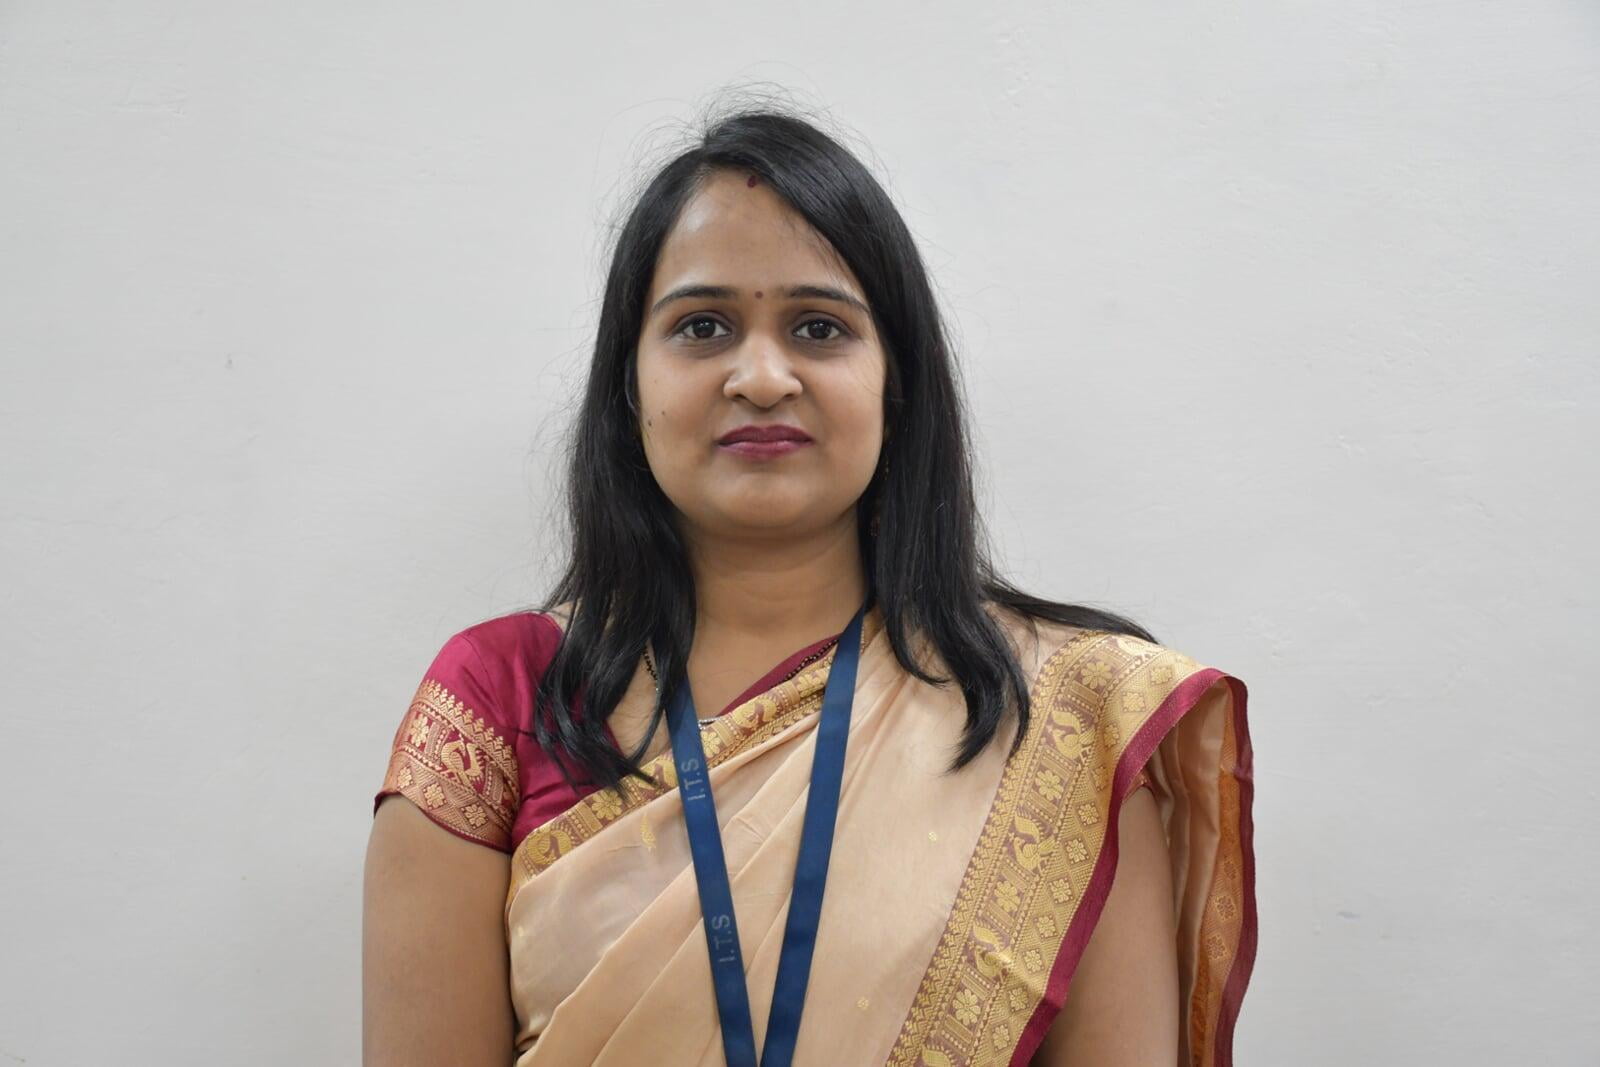 Dr. Nidhi Puri B.Tech Civil Engineering Faculty at ITS